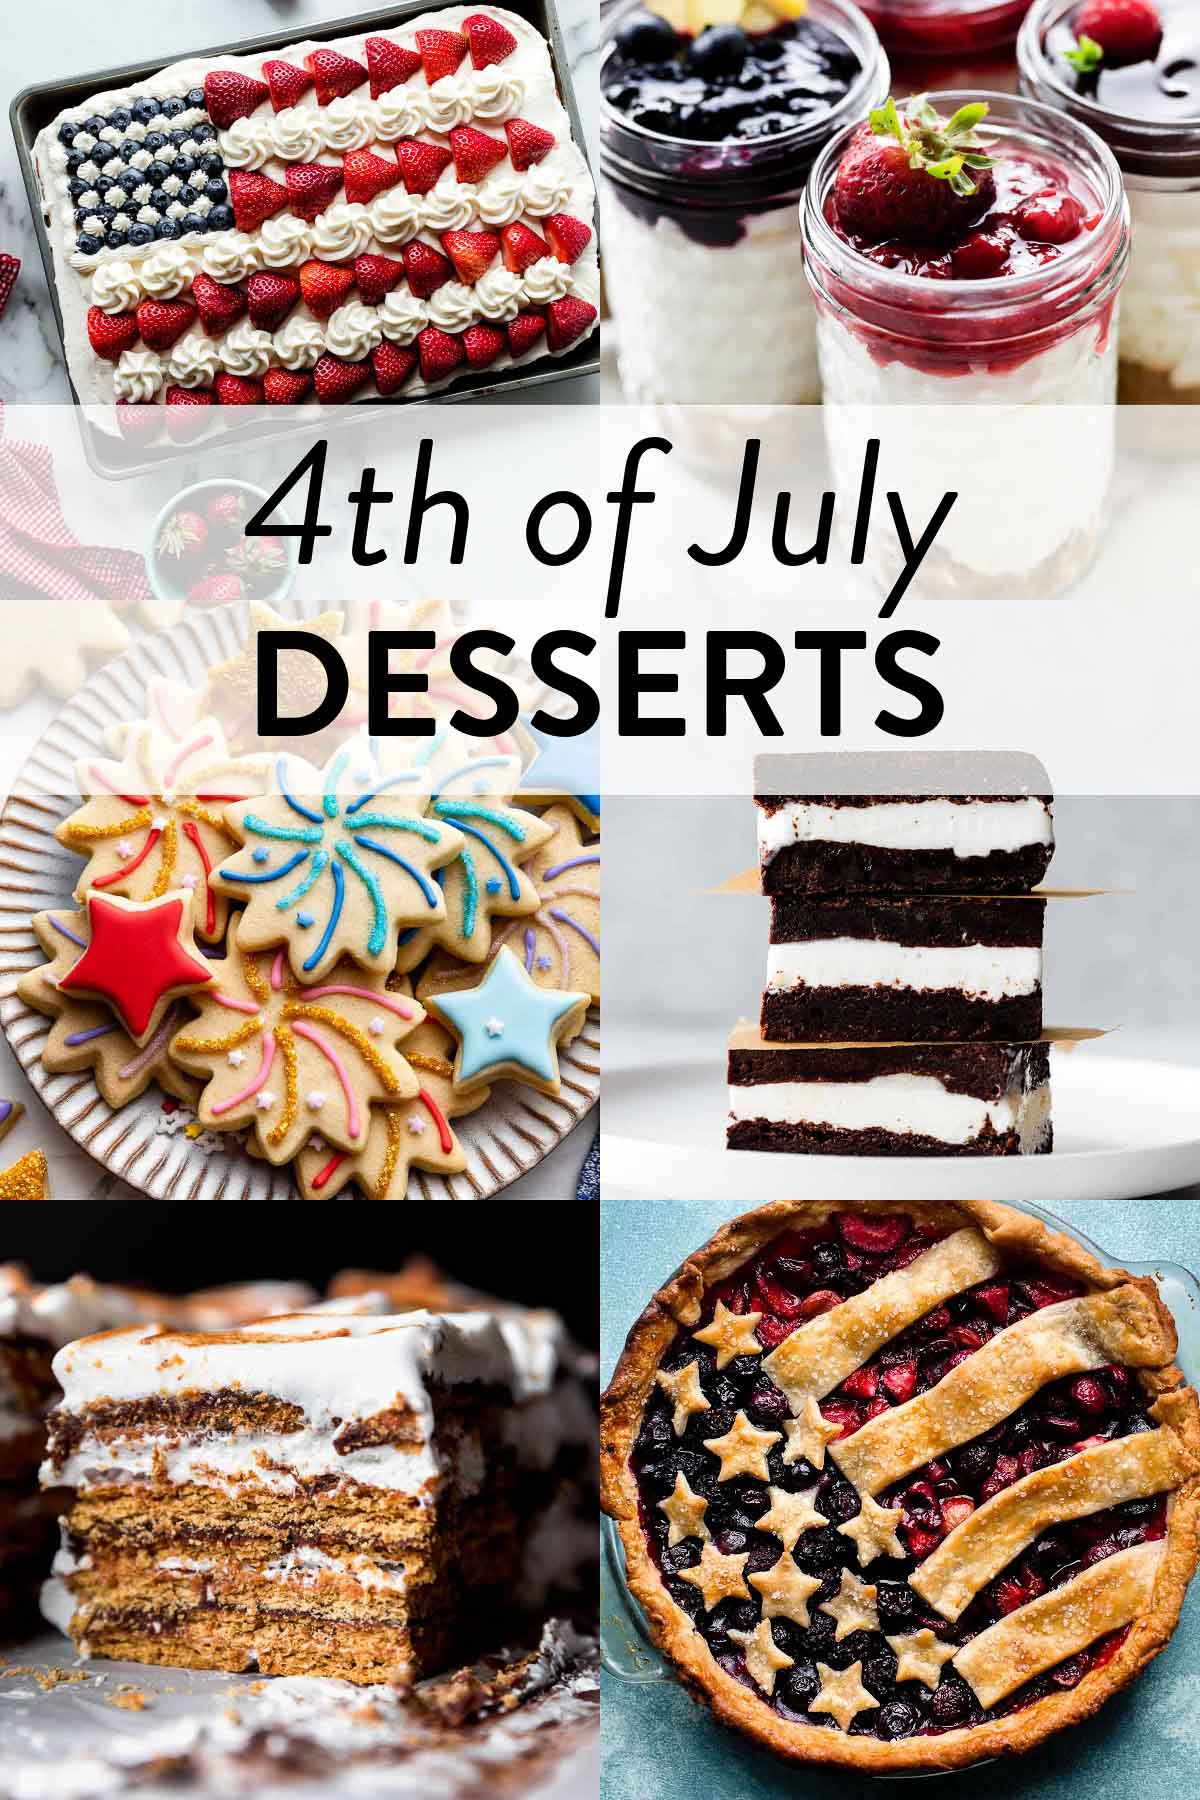 collage of 4th of July dessert recipes including American flag pie and cake, no bake cheesecake jars, fireworks cookies, ice cream sandwiches, and s'mores cake.